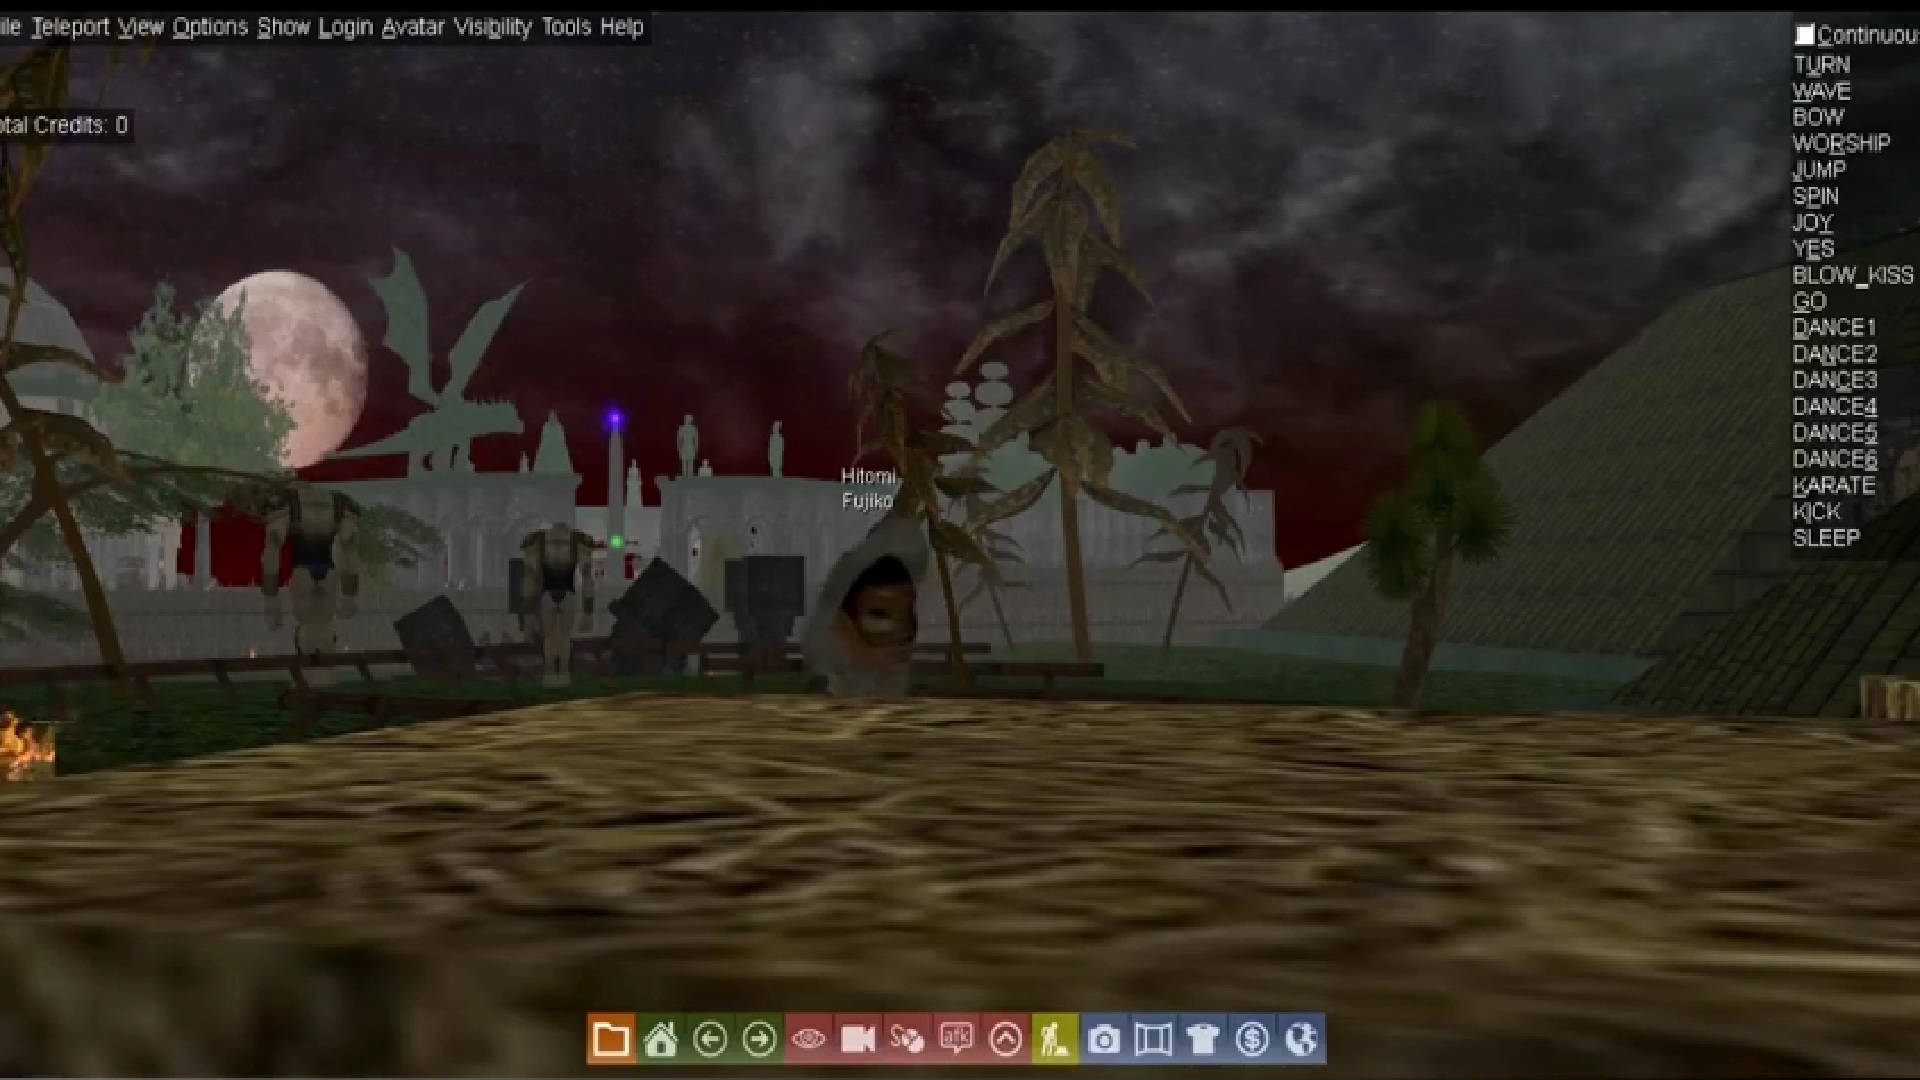 Vinesauce Vinny Just Streamed Some Creepy Ghost S*** In An Abandoned Online  Game — GameTyrant